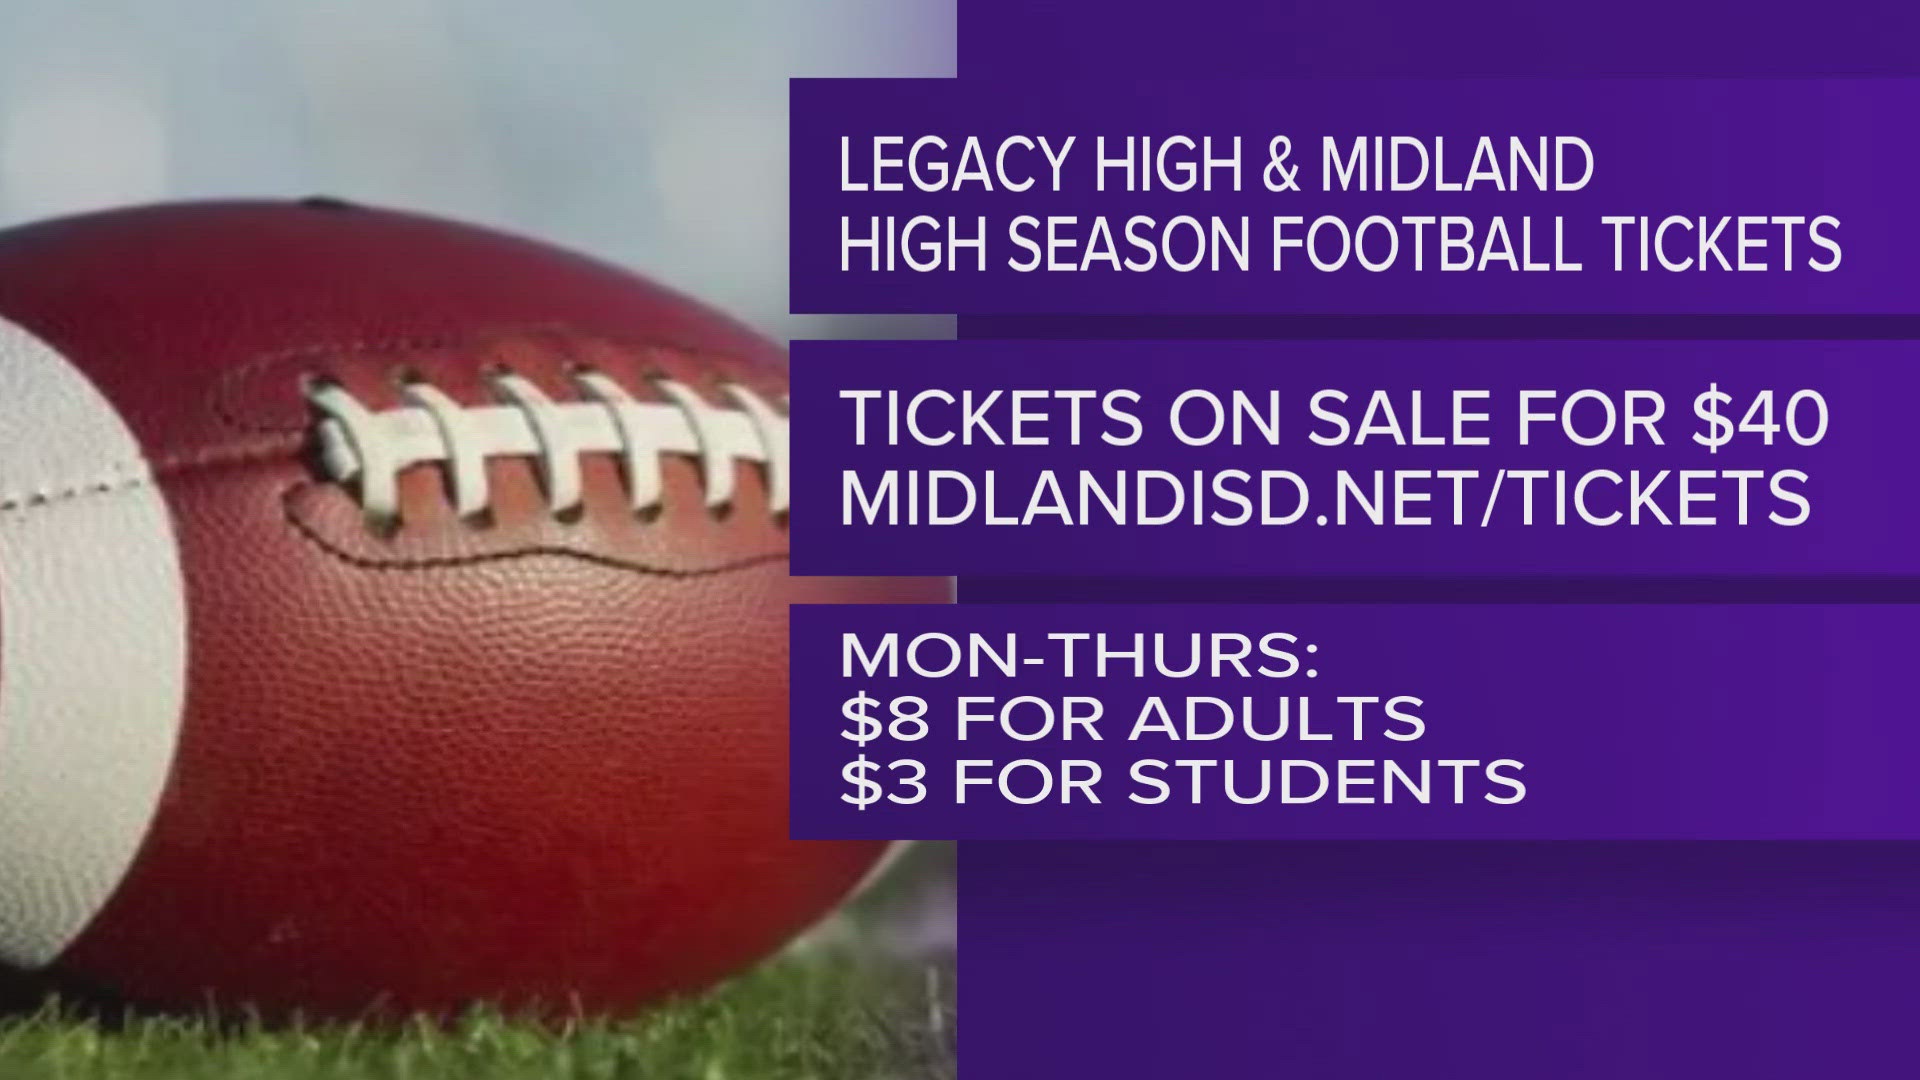 For $40, fans can secure a season ticket package for either LHS or MHS.